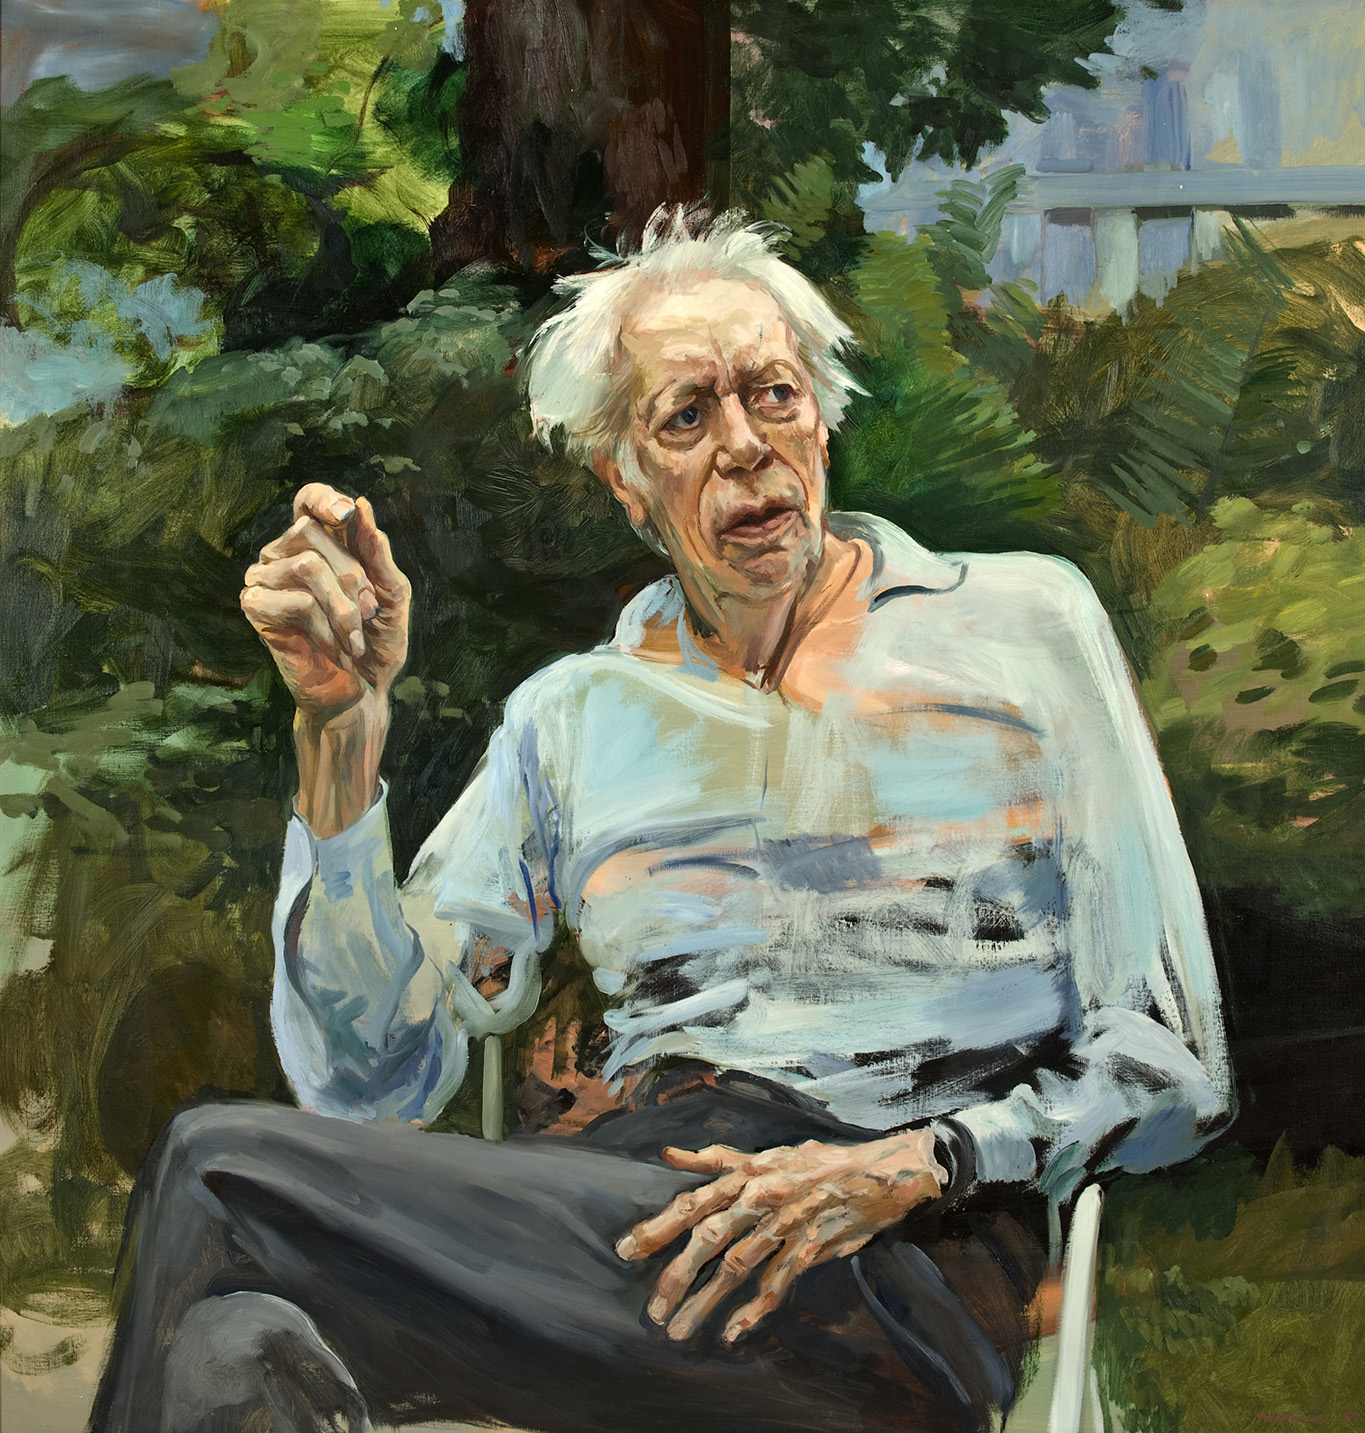  Old Resident; oil on canvas, 46 x 44 inches, 1987 